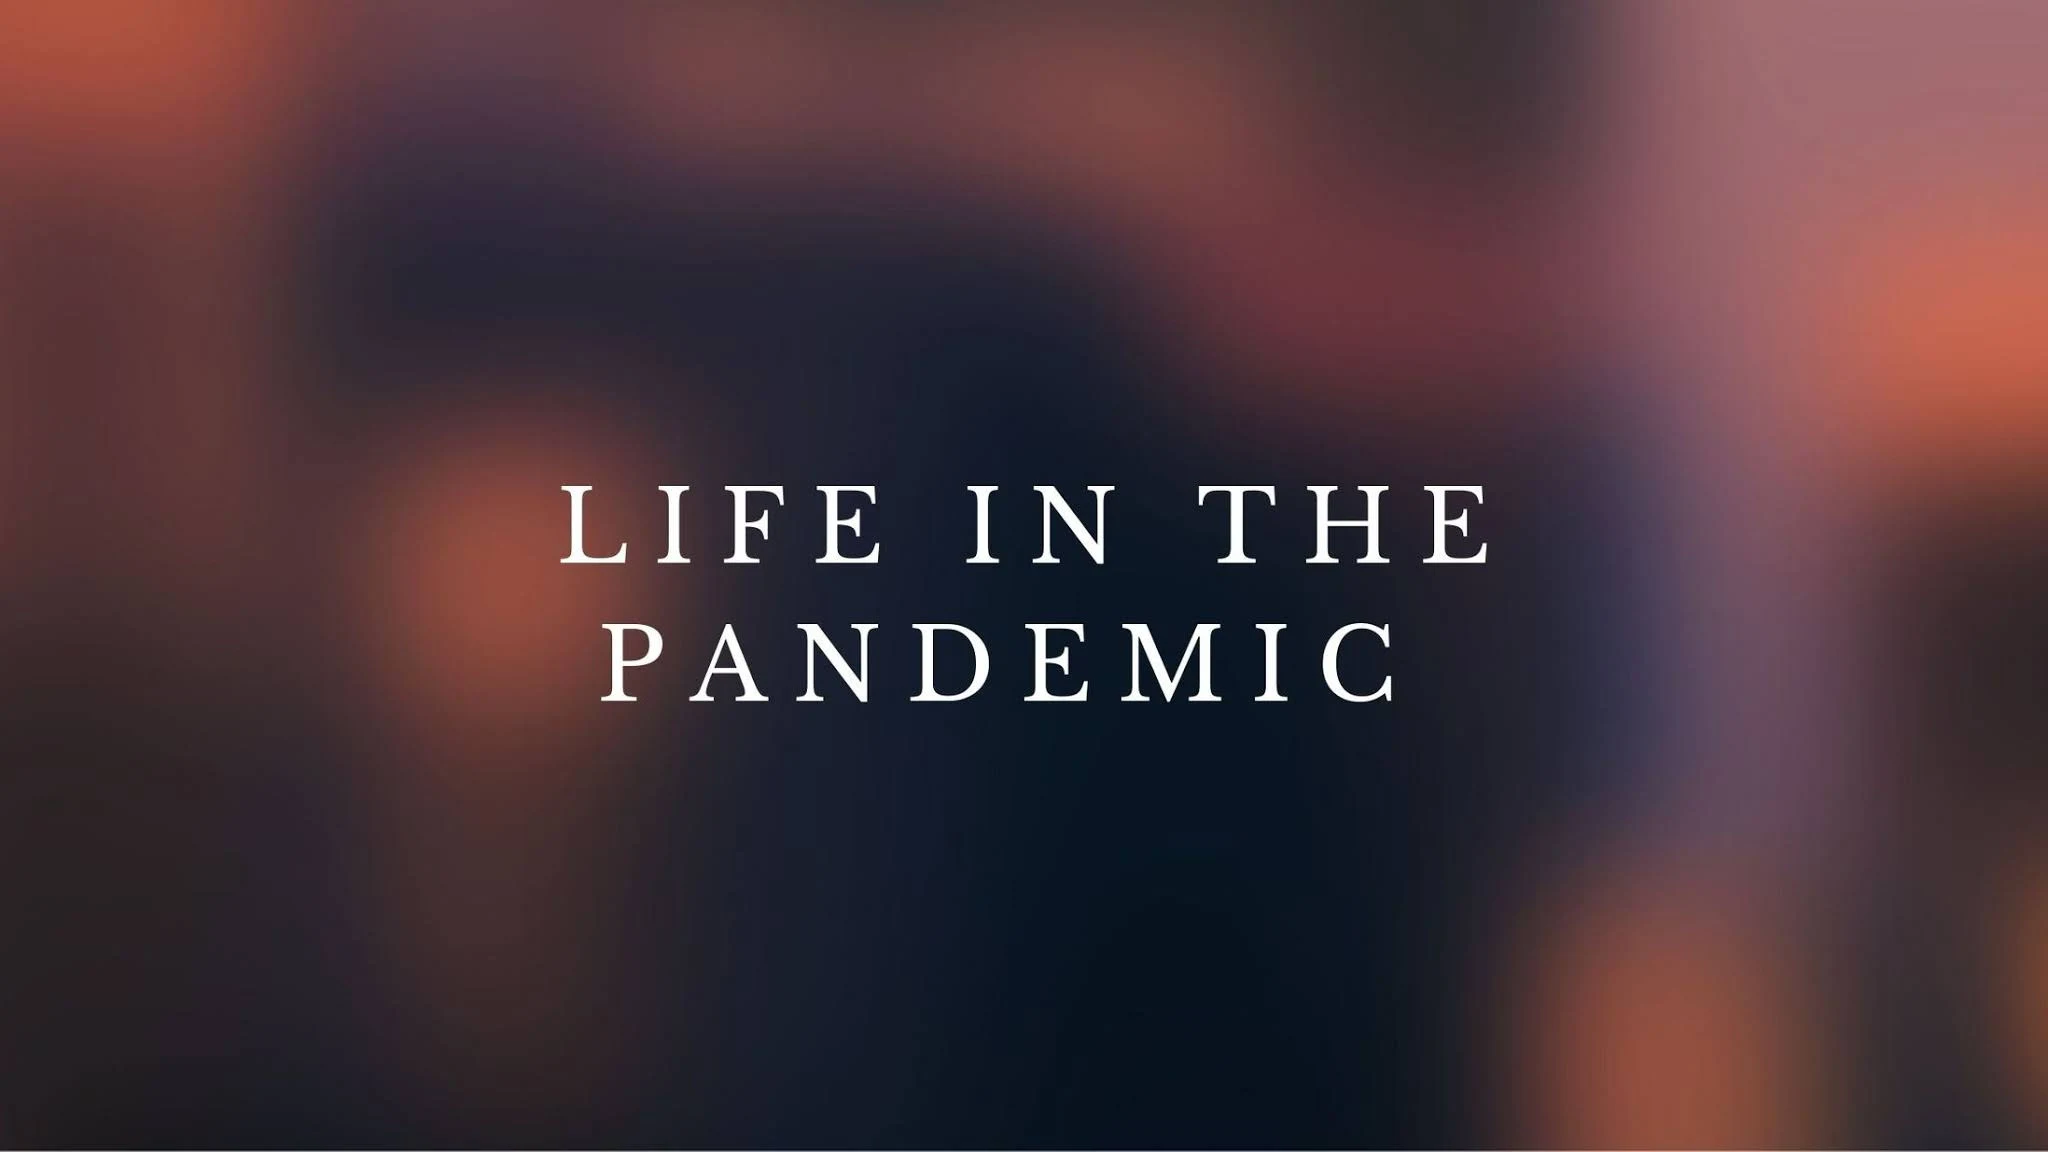 Life in the pandemic